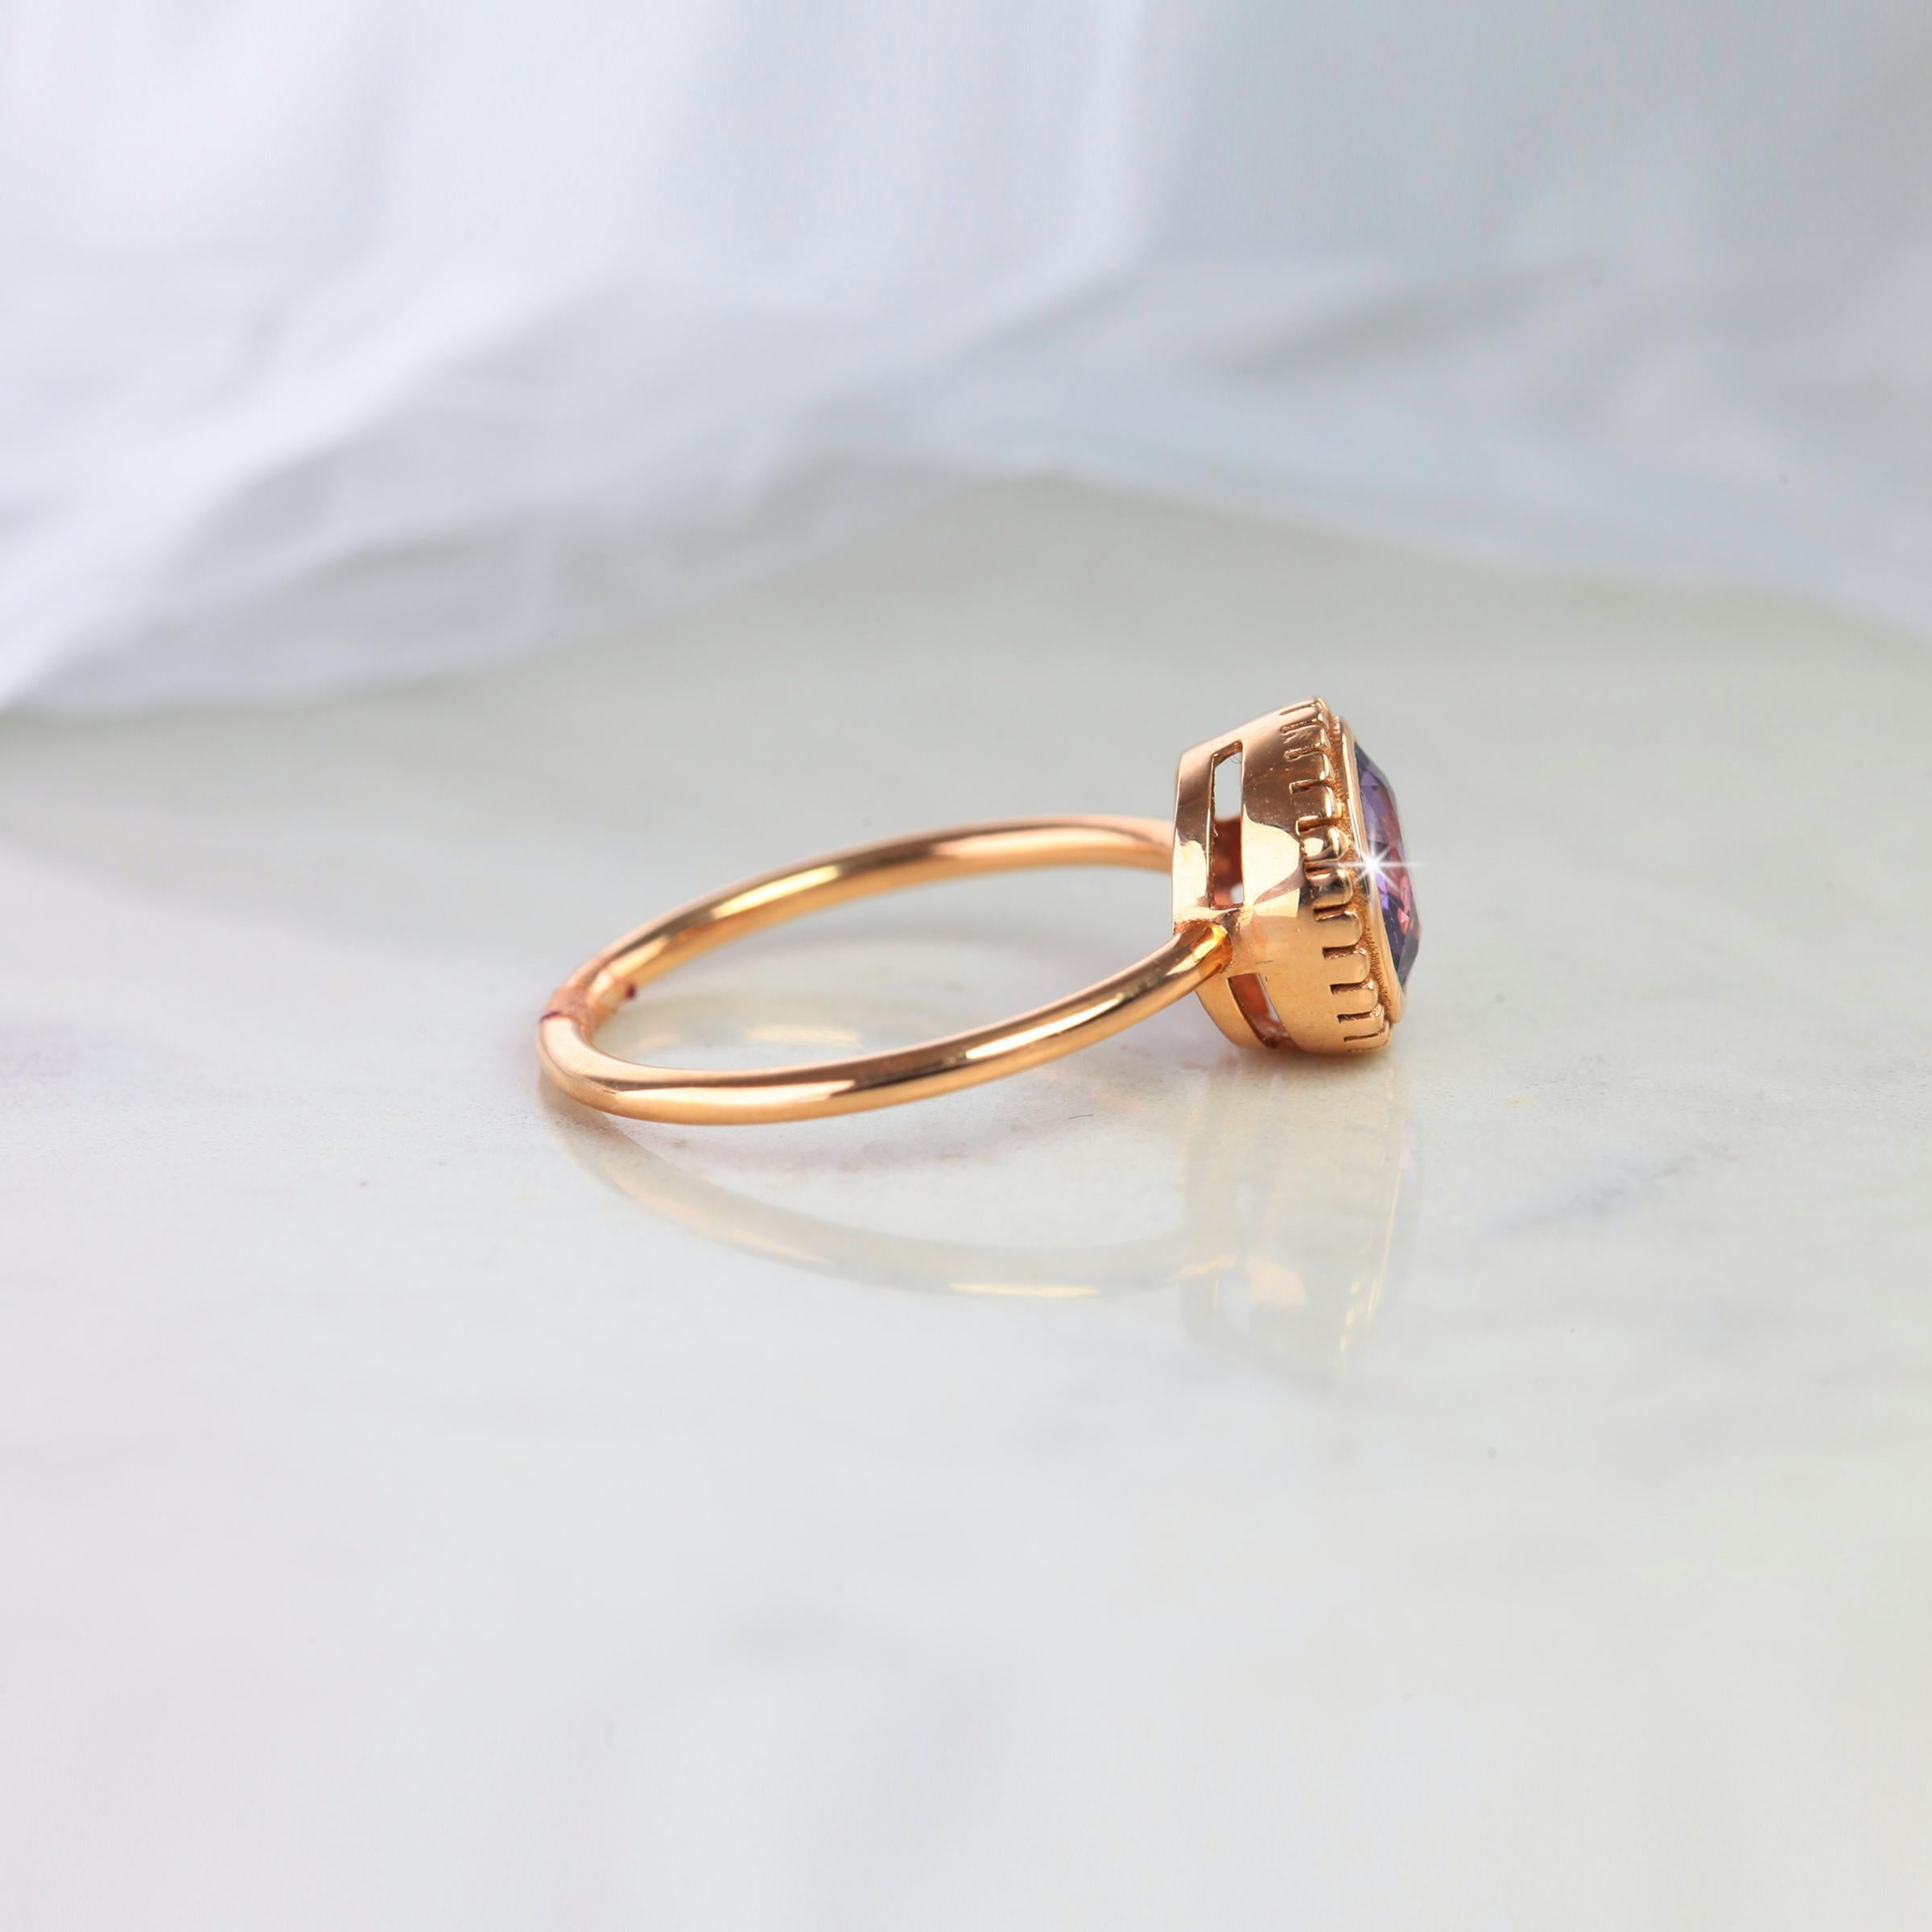 Vintage Style Purple Spinal Dainty Ring, Vintage Dainty Round Spinal Ring Rosegold , Engagement Ring, Solitaire Ring, Statement Ring created by hands from ring to the stone shapes. 

I used brillant round shape to reveal spinal stone for lovers of